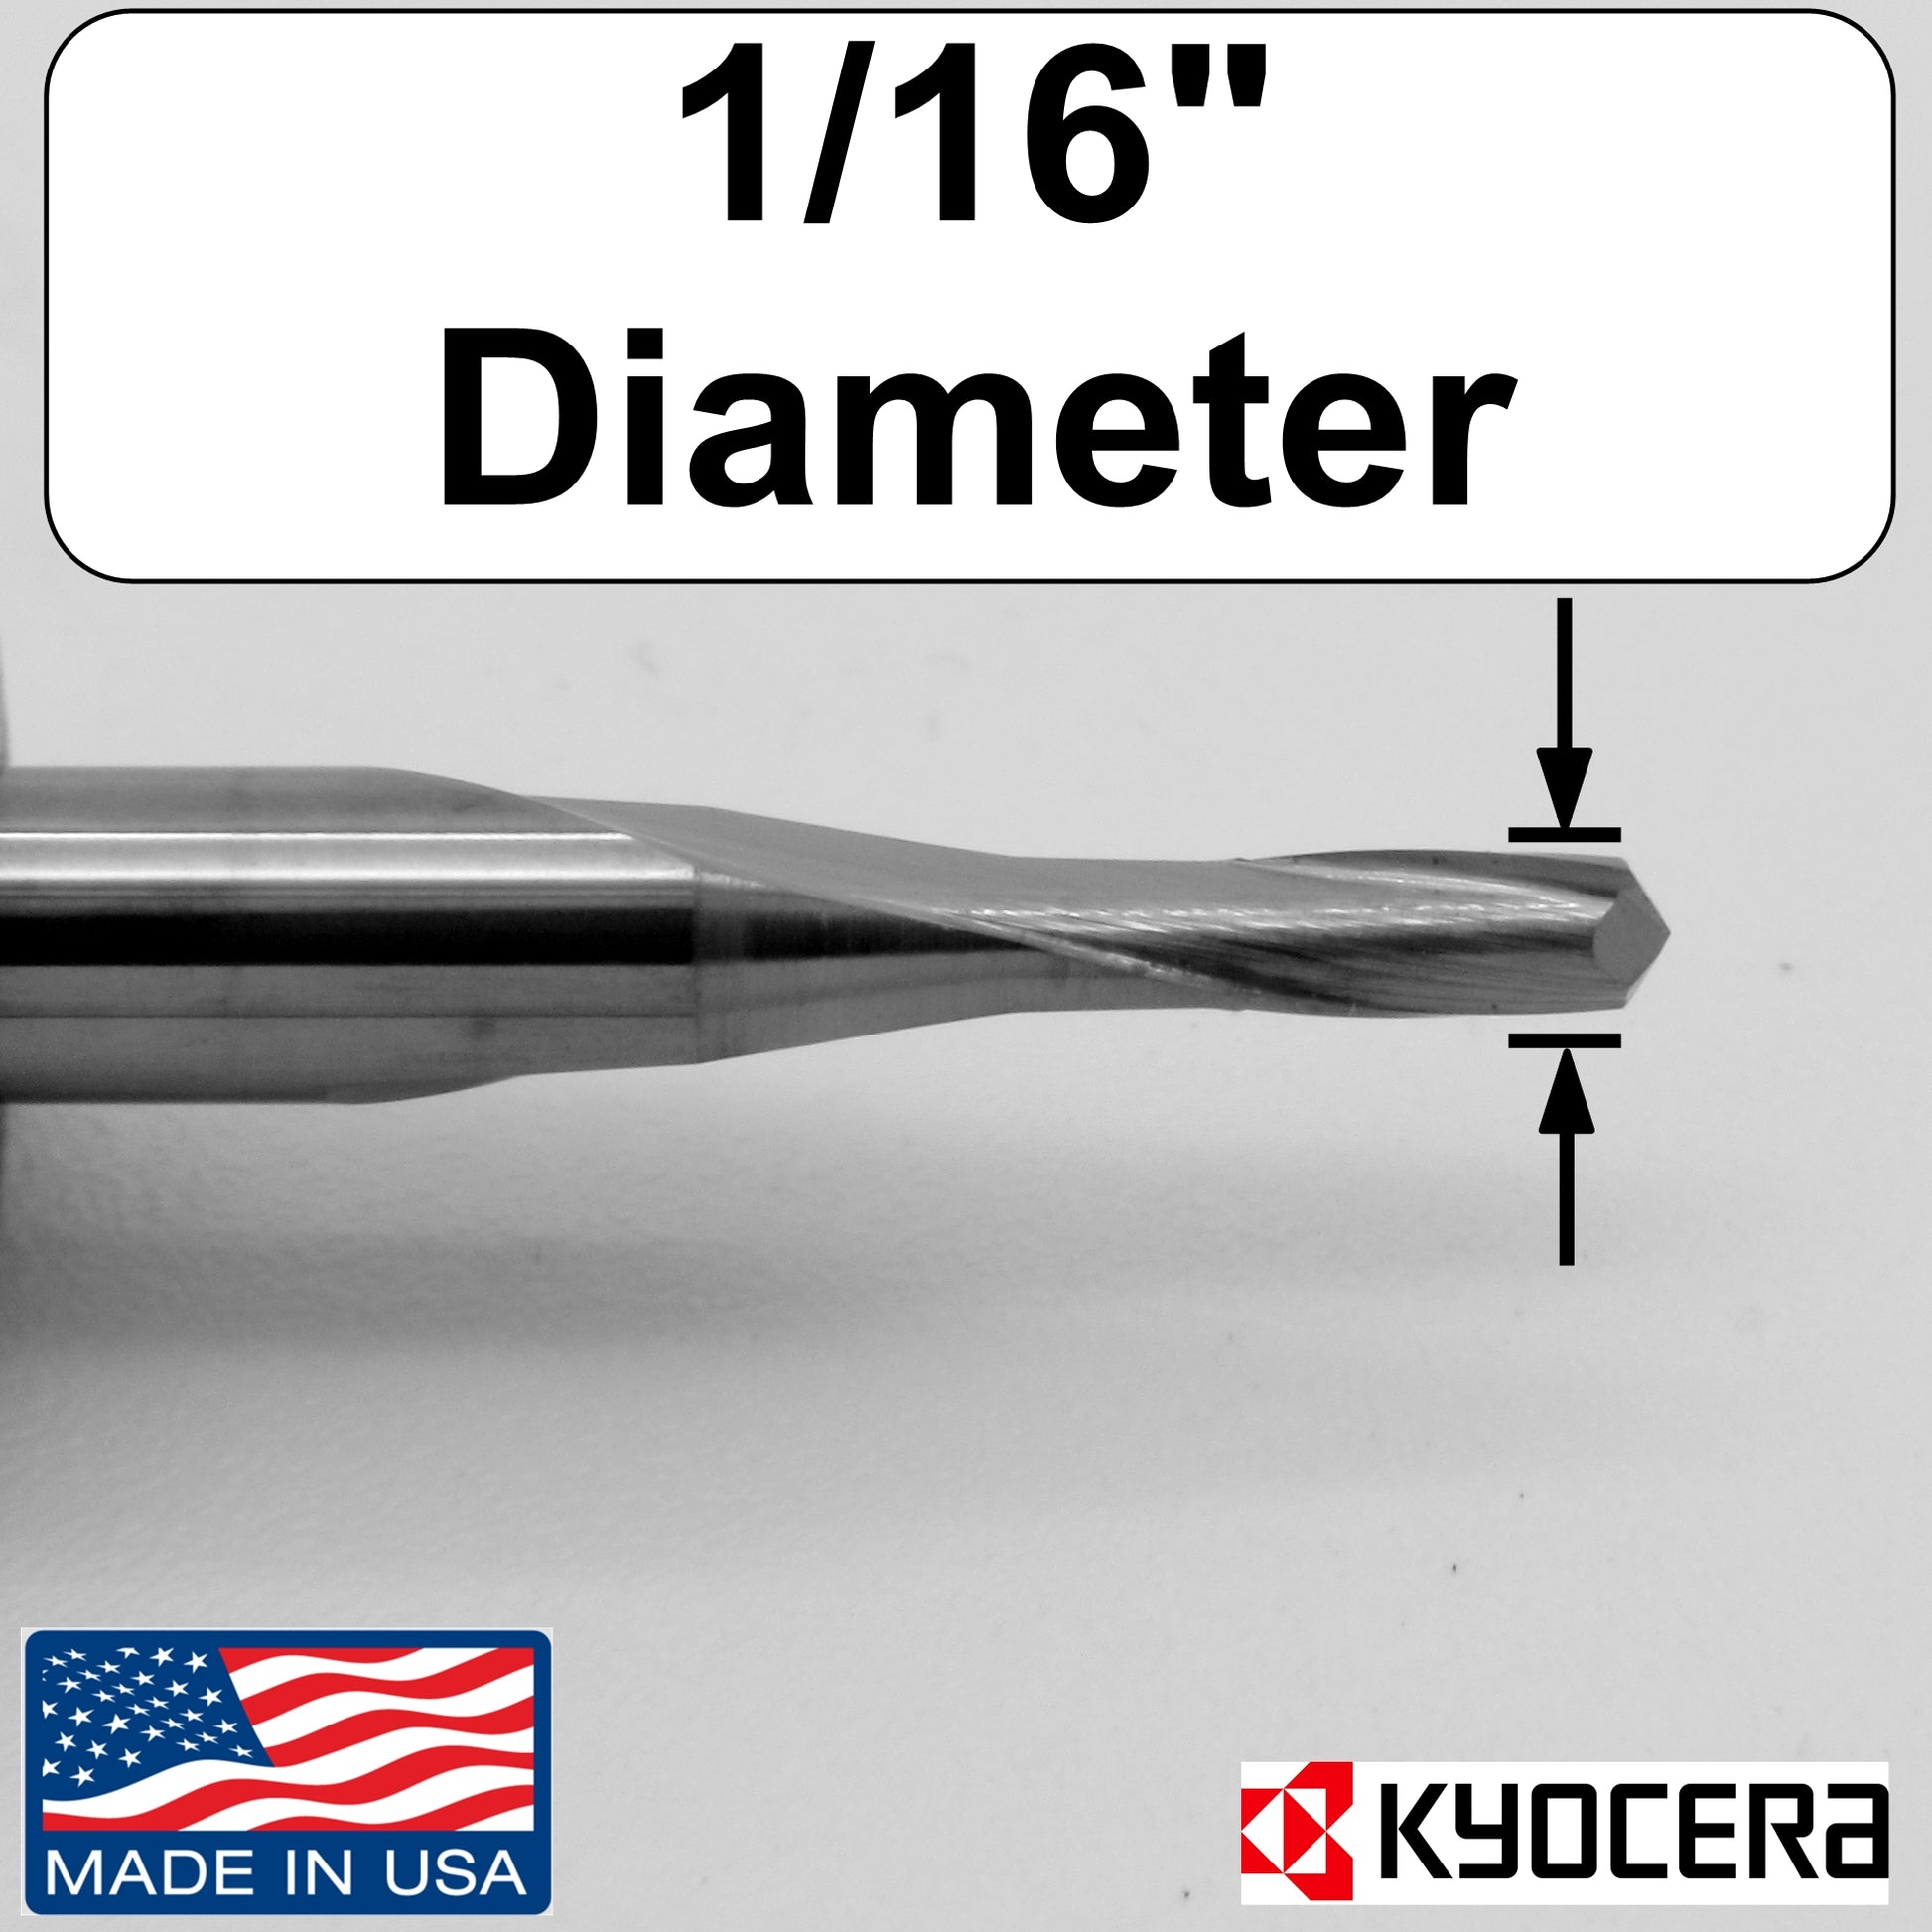 1/16" x .158" LOC Carbide End Mill for Aluminum and Soft Metals  Made in U.S.A. M155